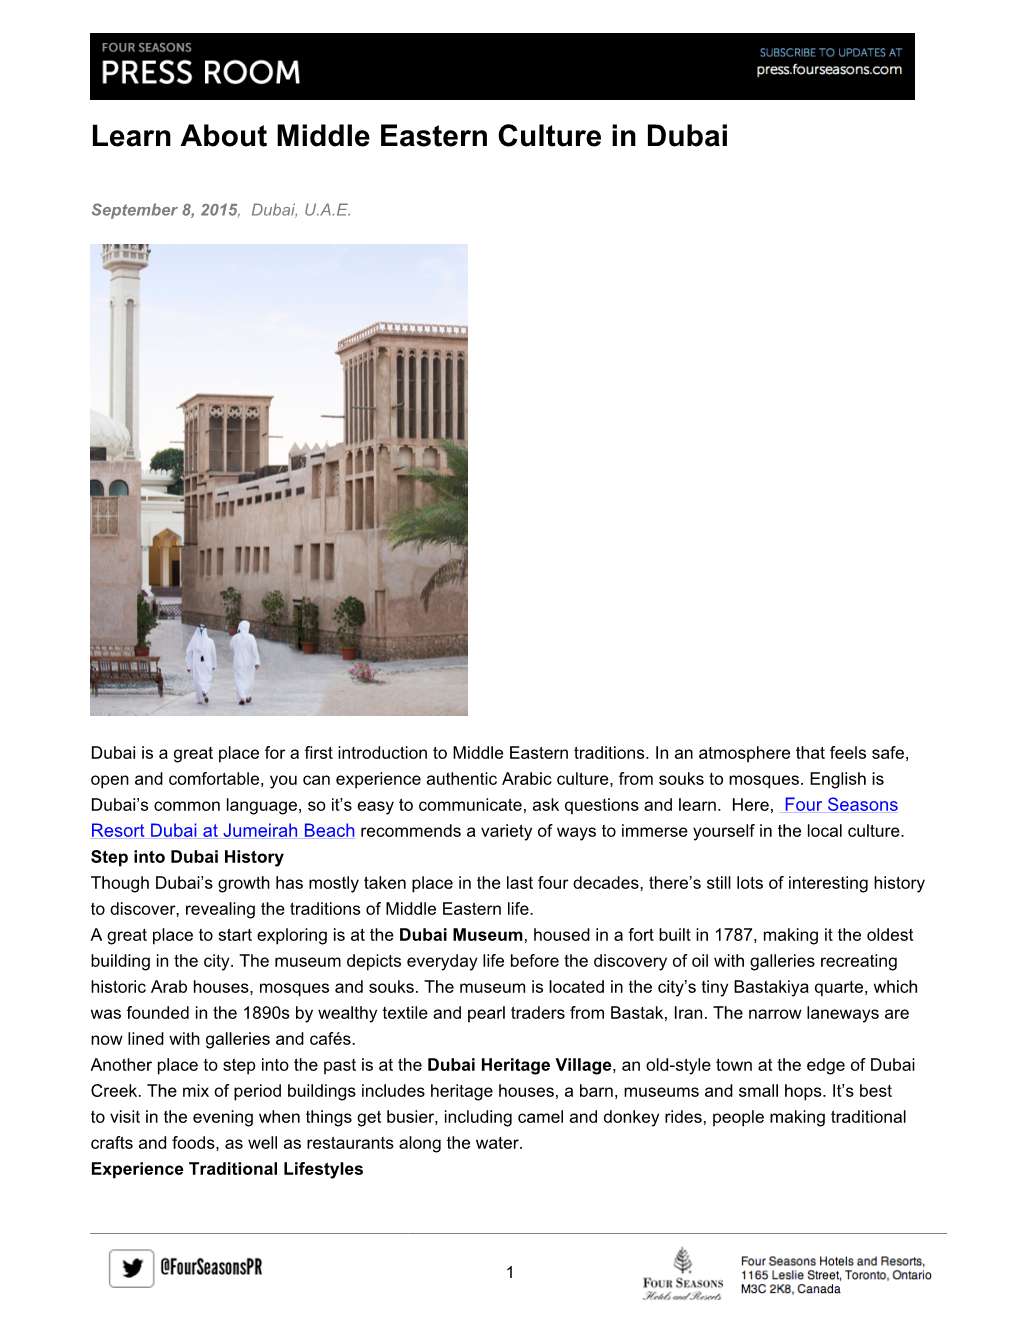 Learn About Middle Eastern Culture in Dubai